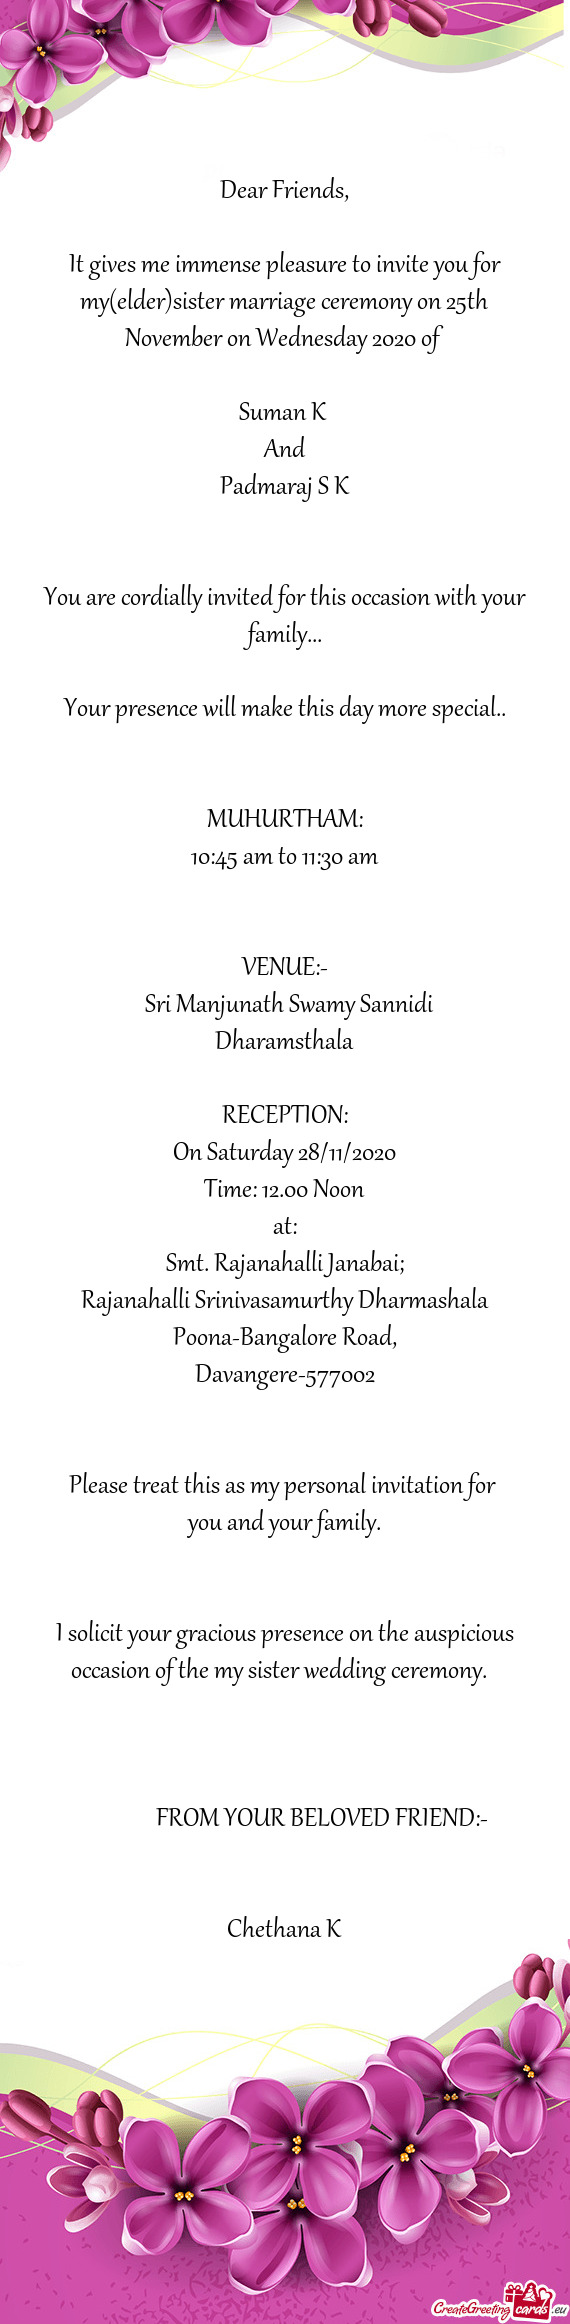 It gives me immense pleasure to invite you for my(elder)sister marriage ceremony on 25th November on